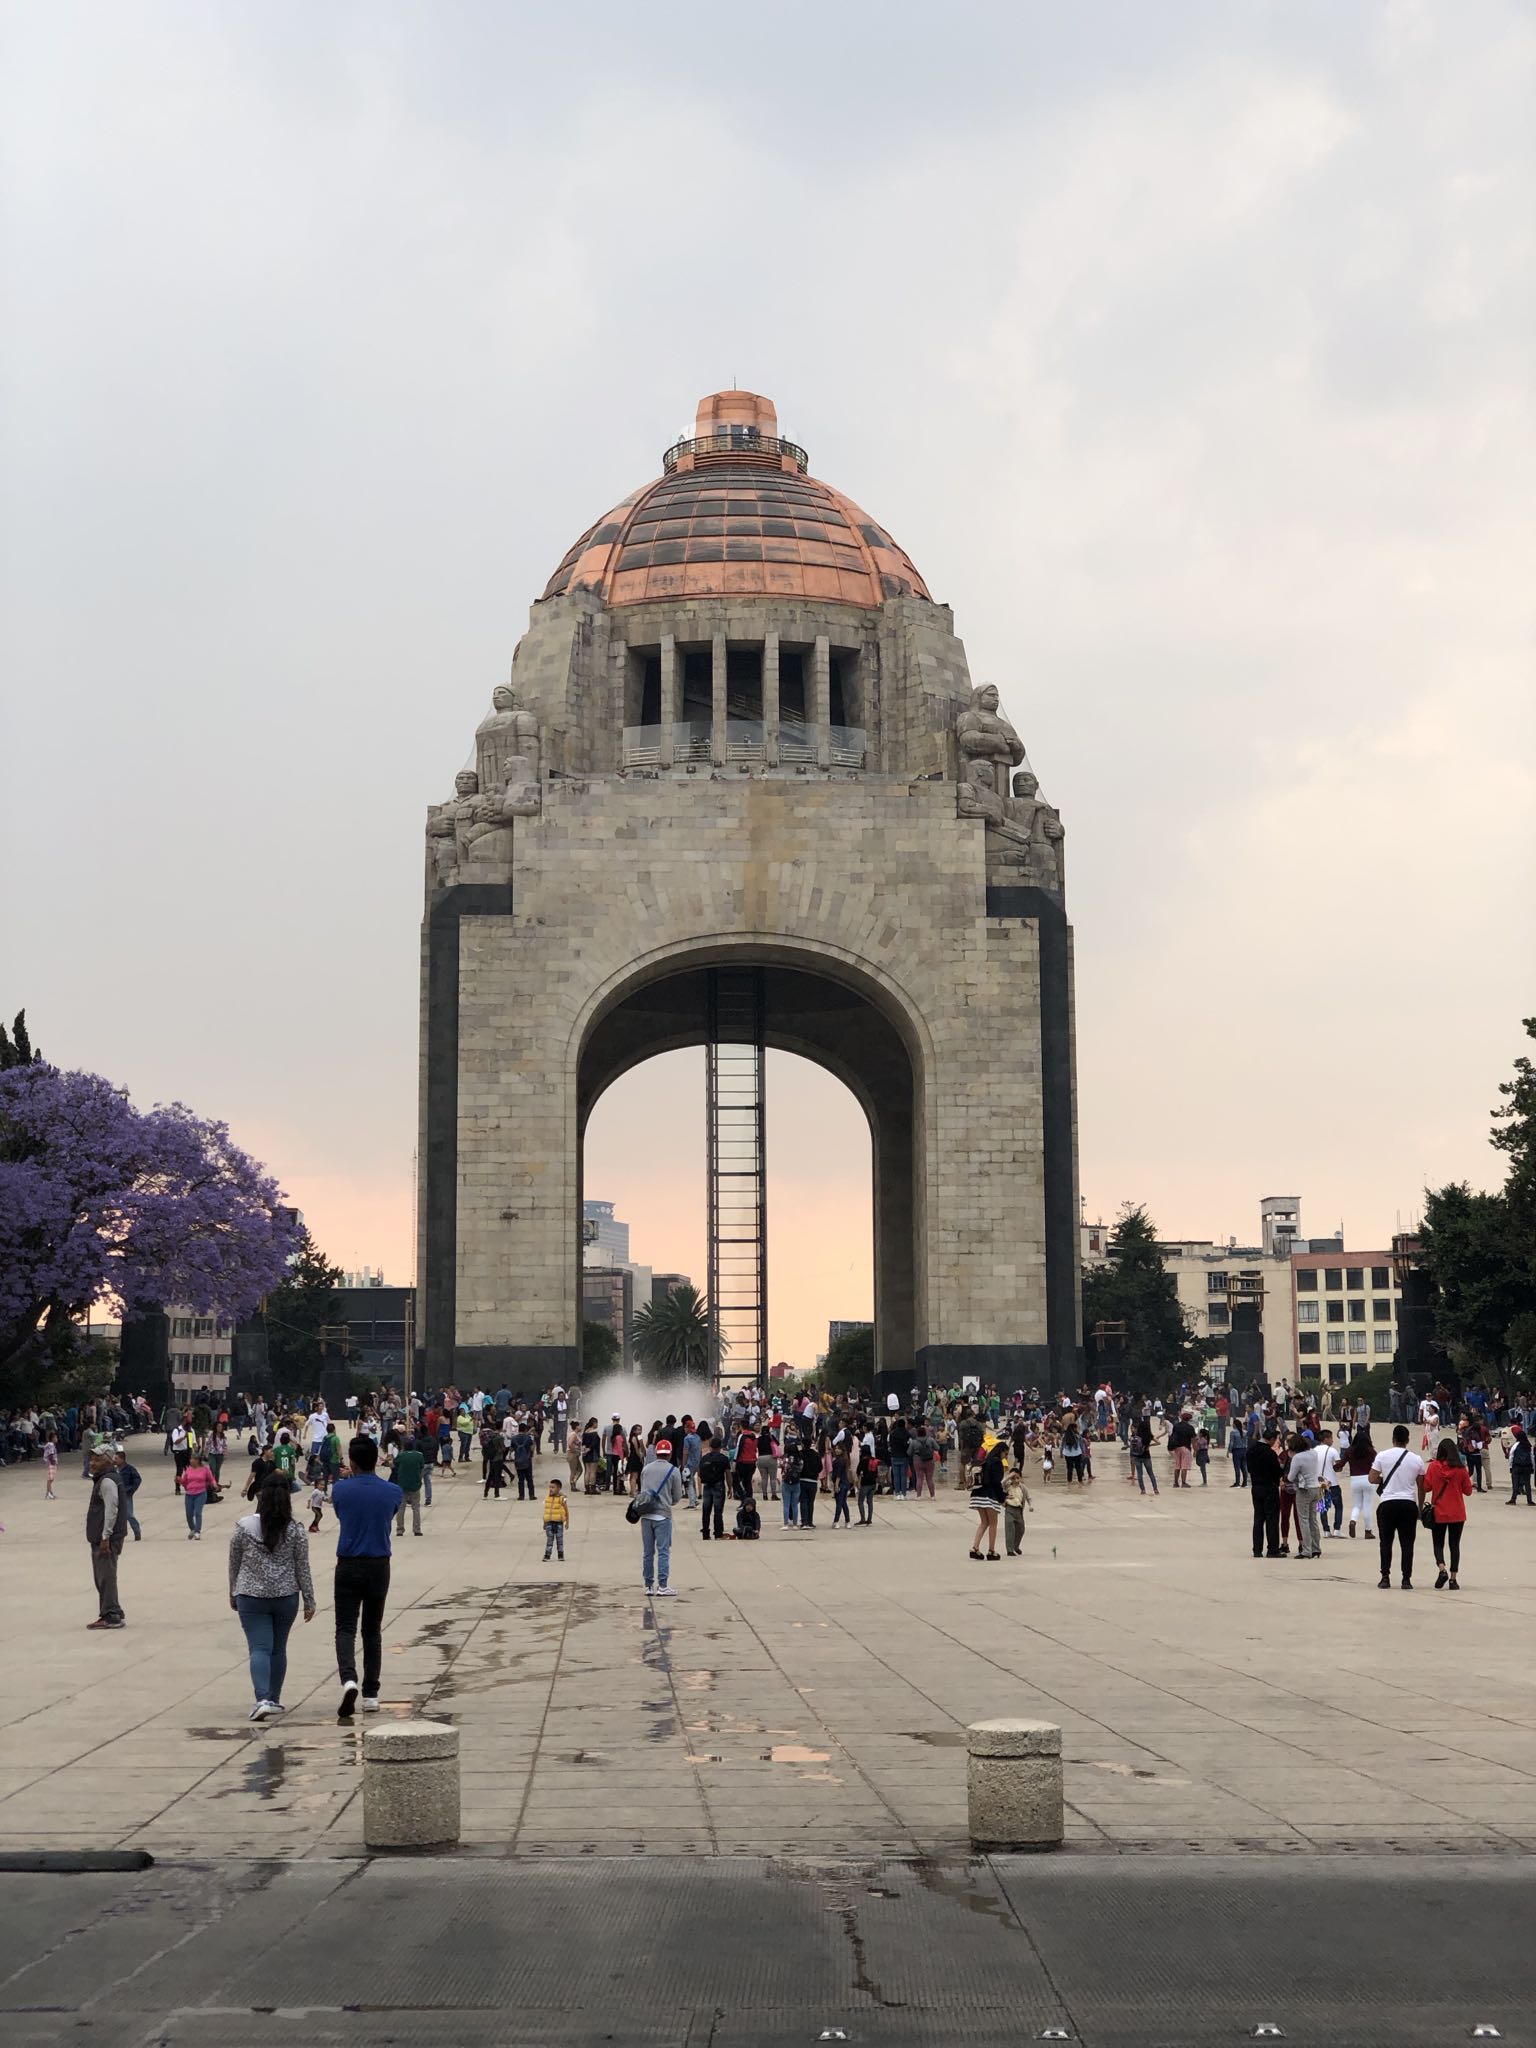 Photo 66 of 362 from the album Highlights Mexico 2019.